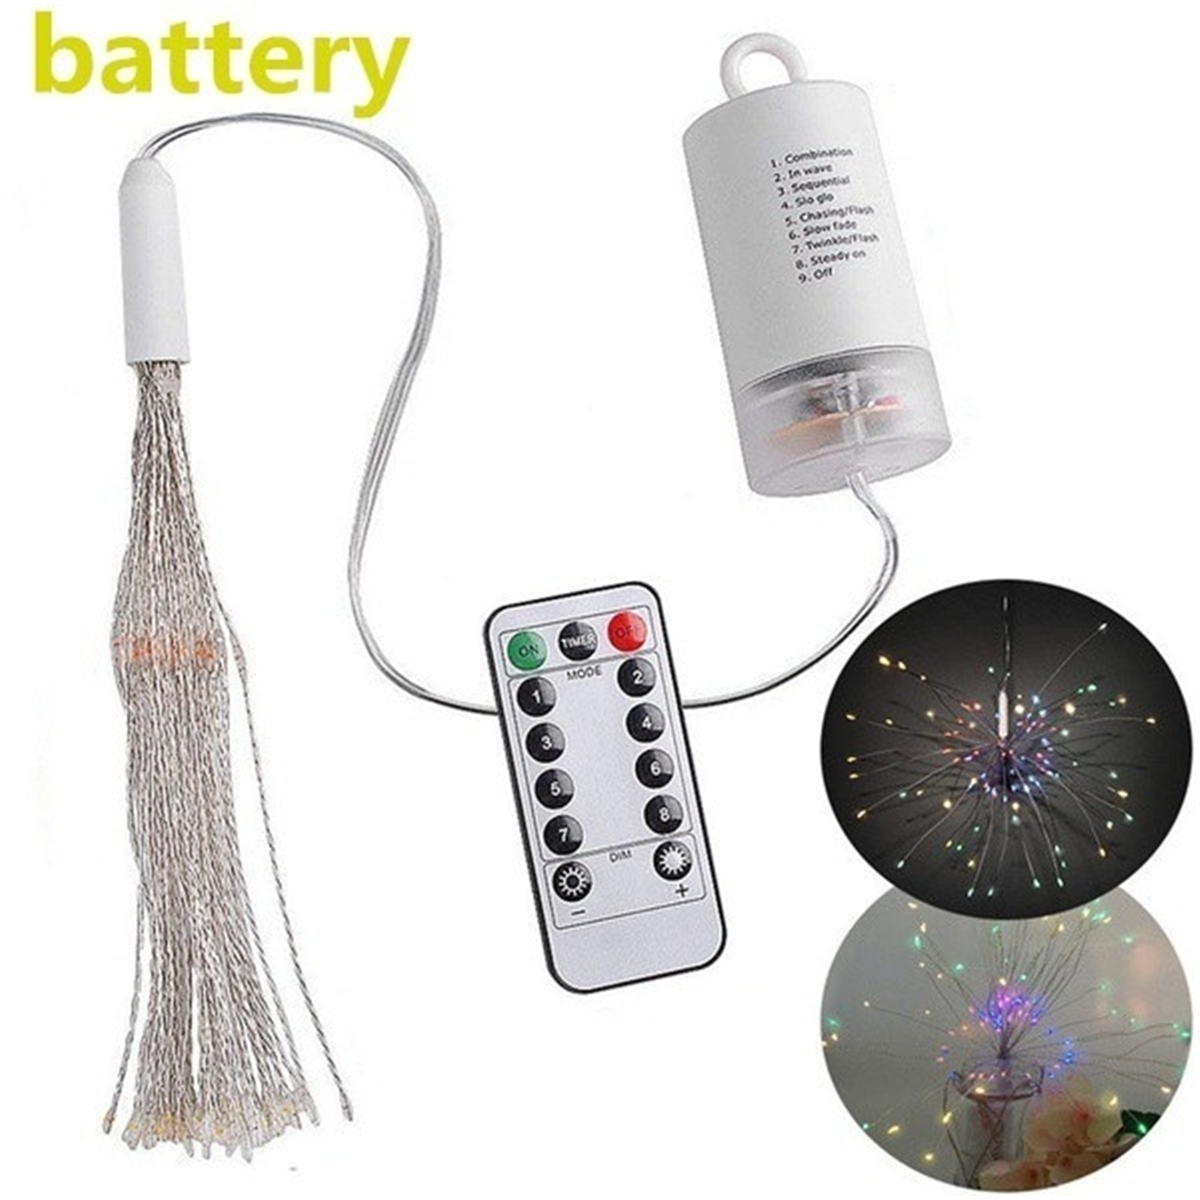 100200-LED-Firework-Light-8-Mode-Fairy-String-Lamp-with-Remote-Control-for-Home-Garden-Decor-1678624-2